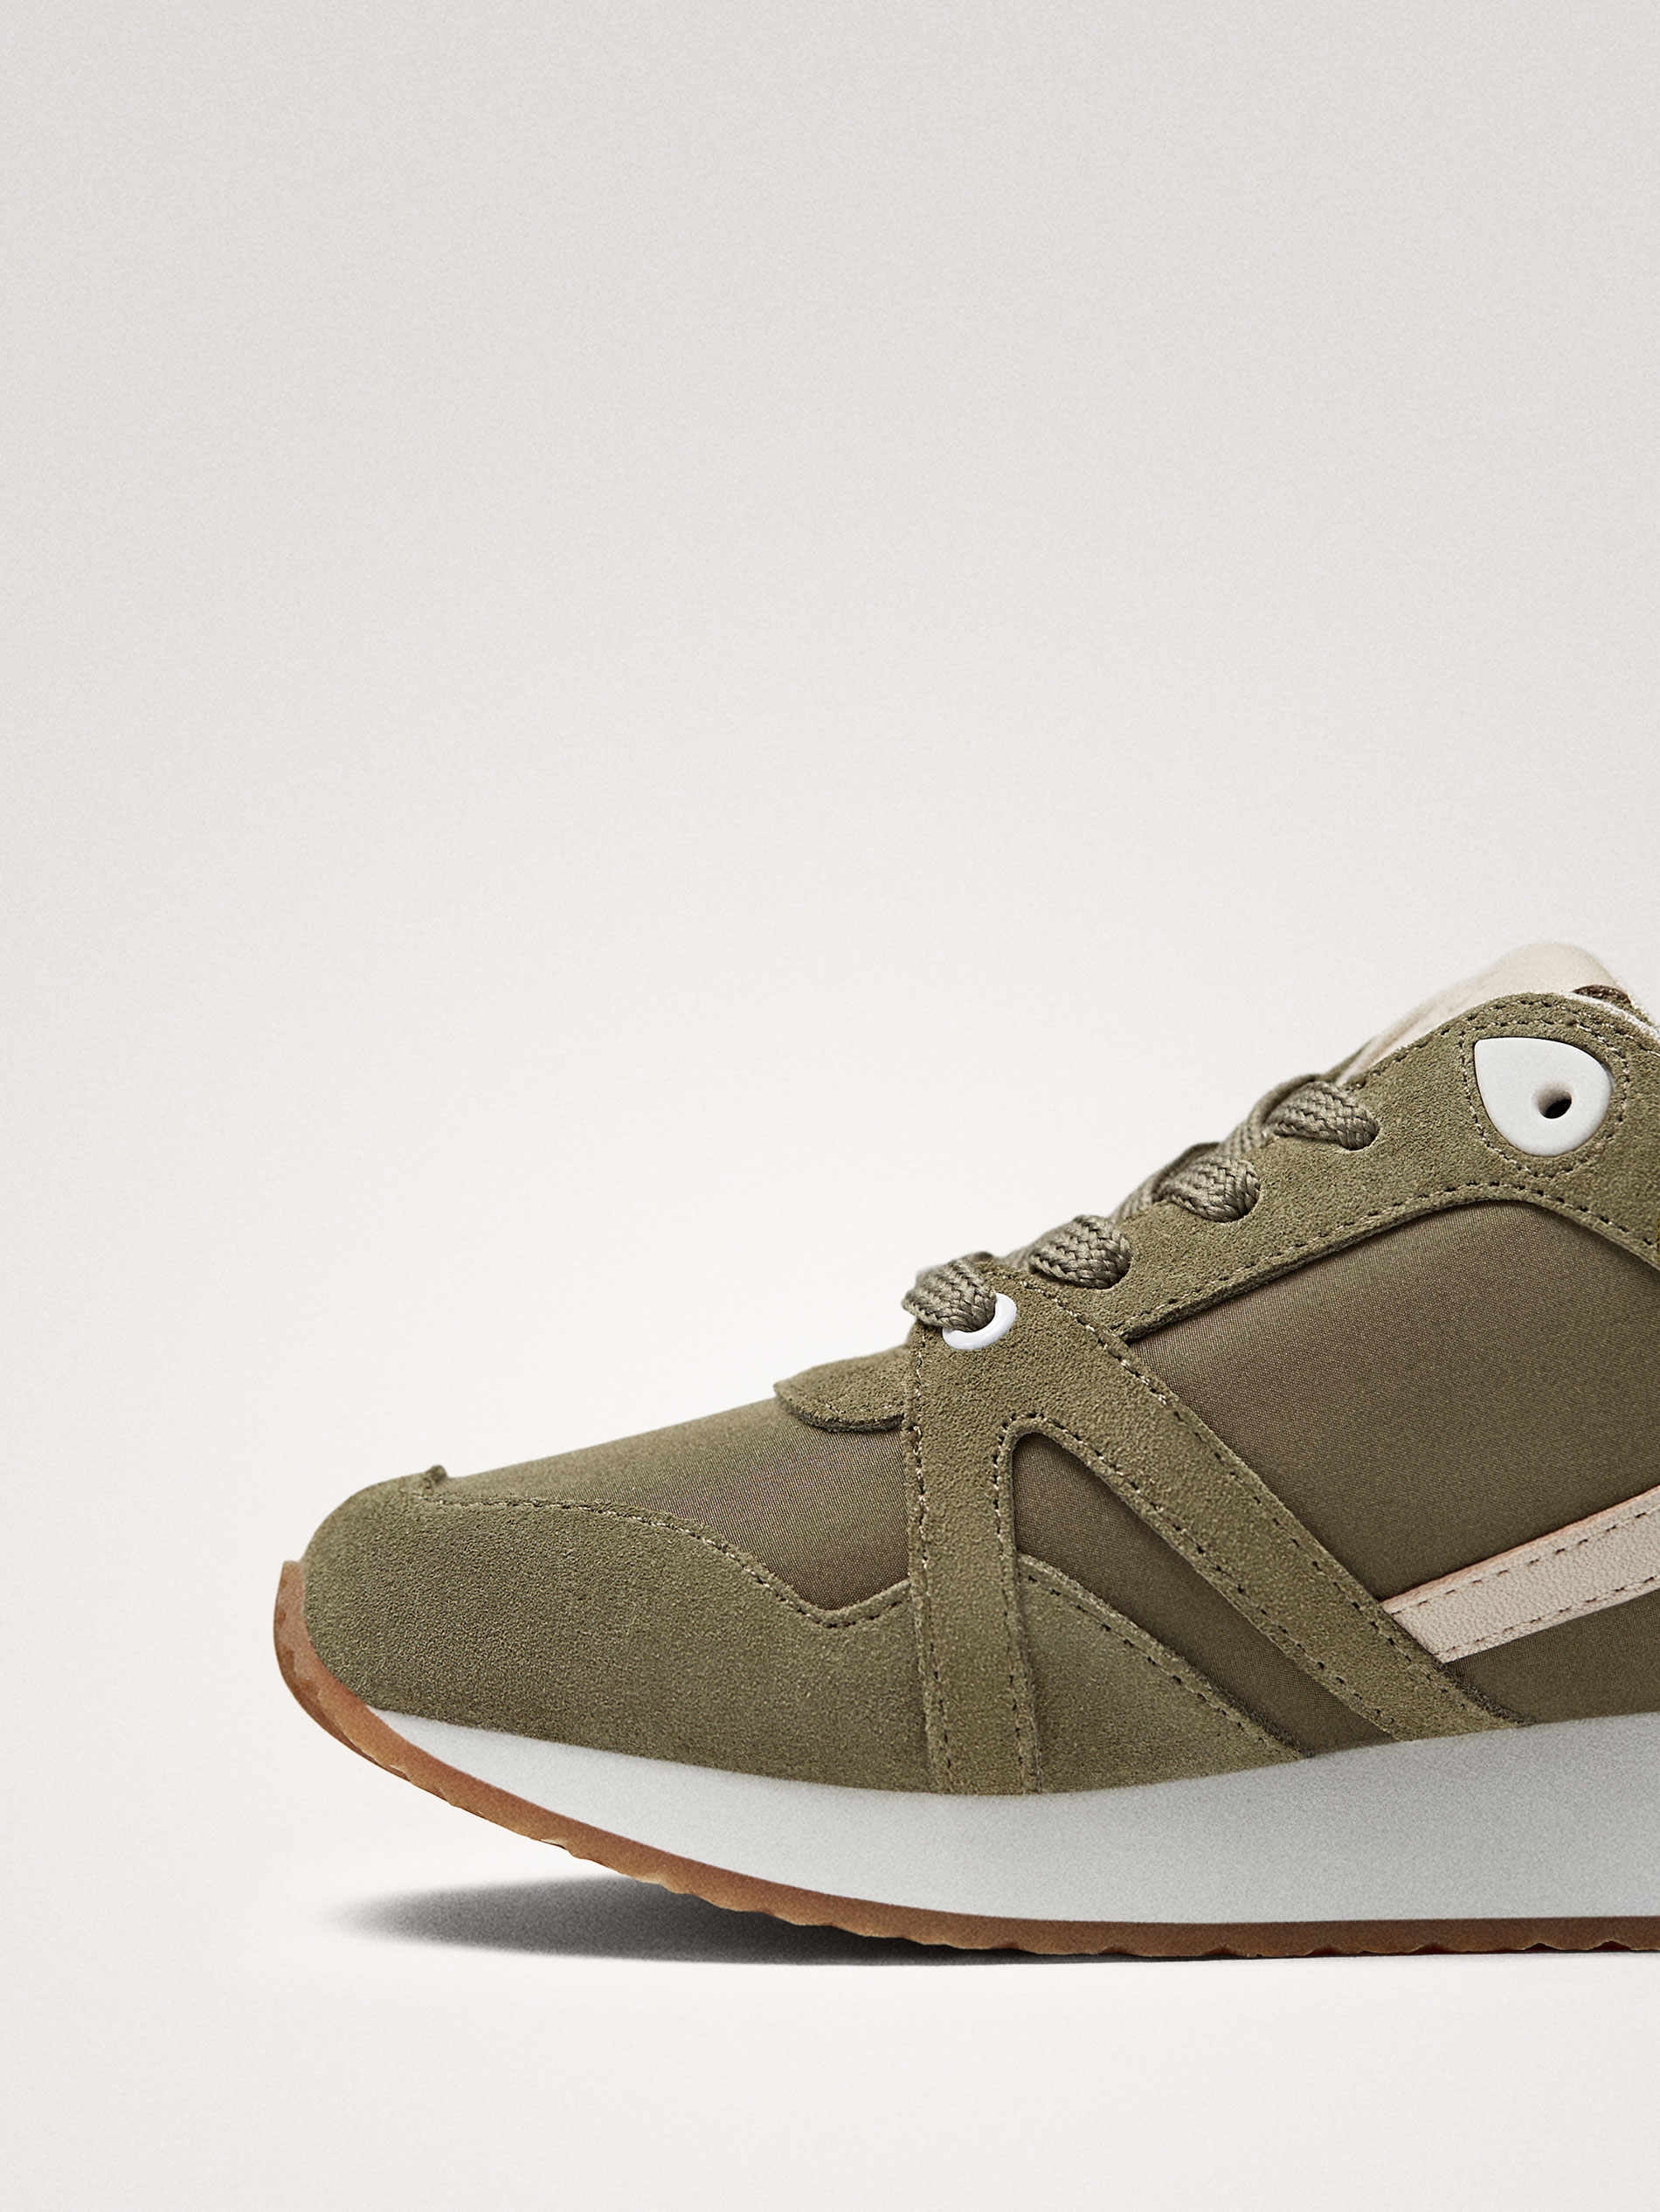 Massimo Dutti KHAKI COMBINED TRAINERS at £54.95 | love the brands